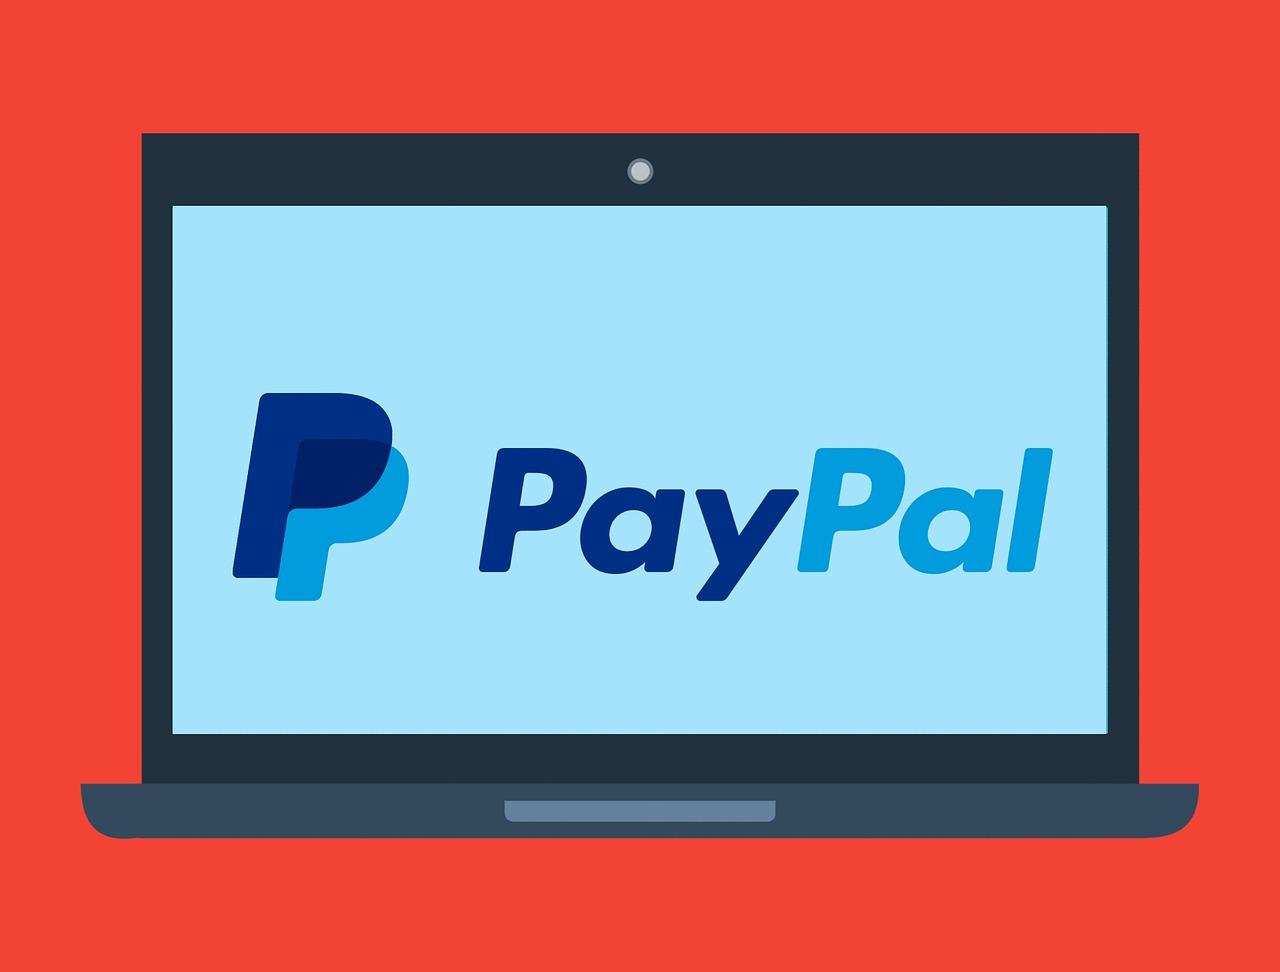 paypal stock stocktwits